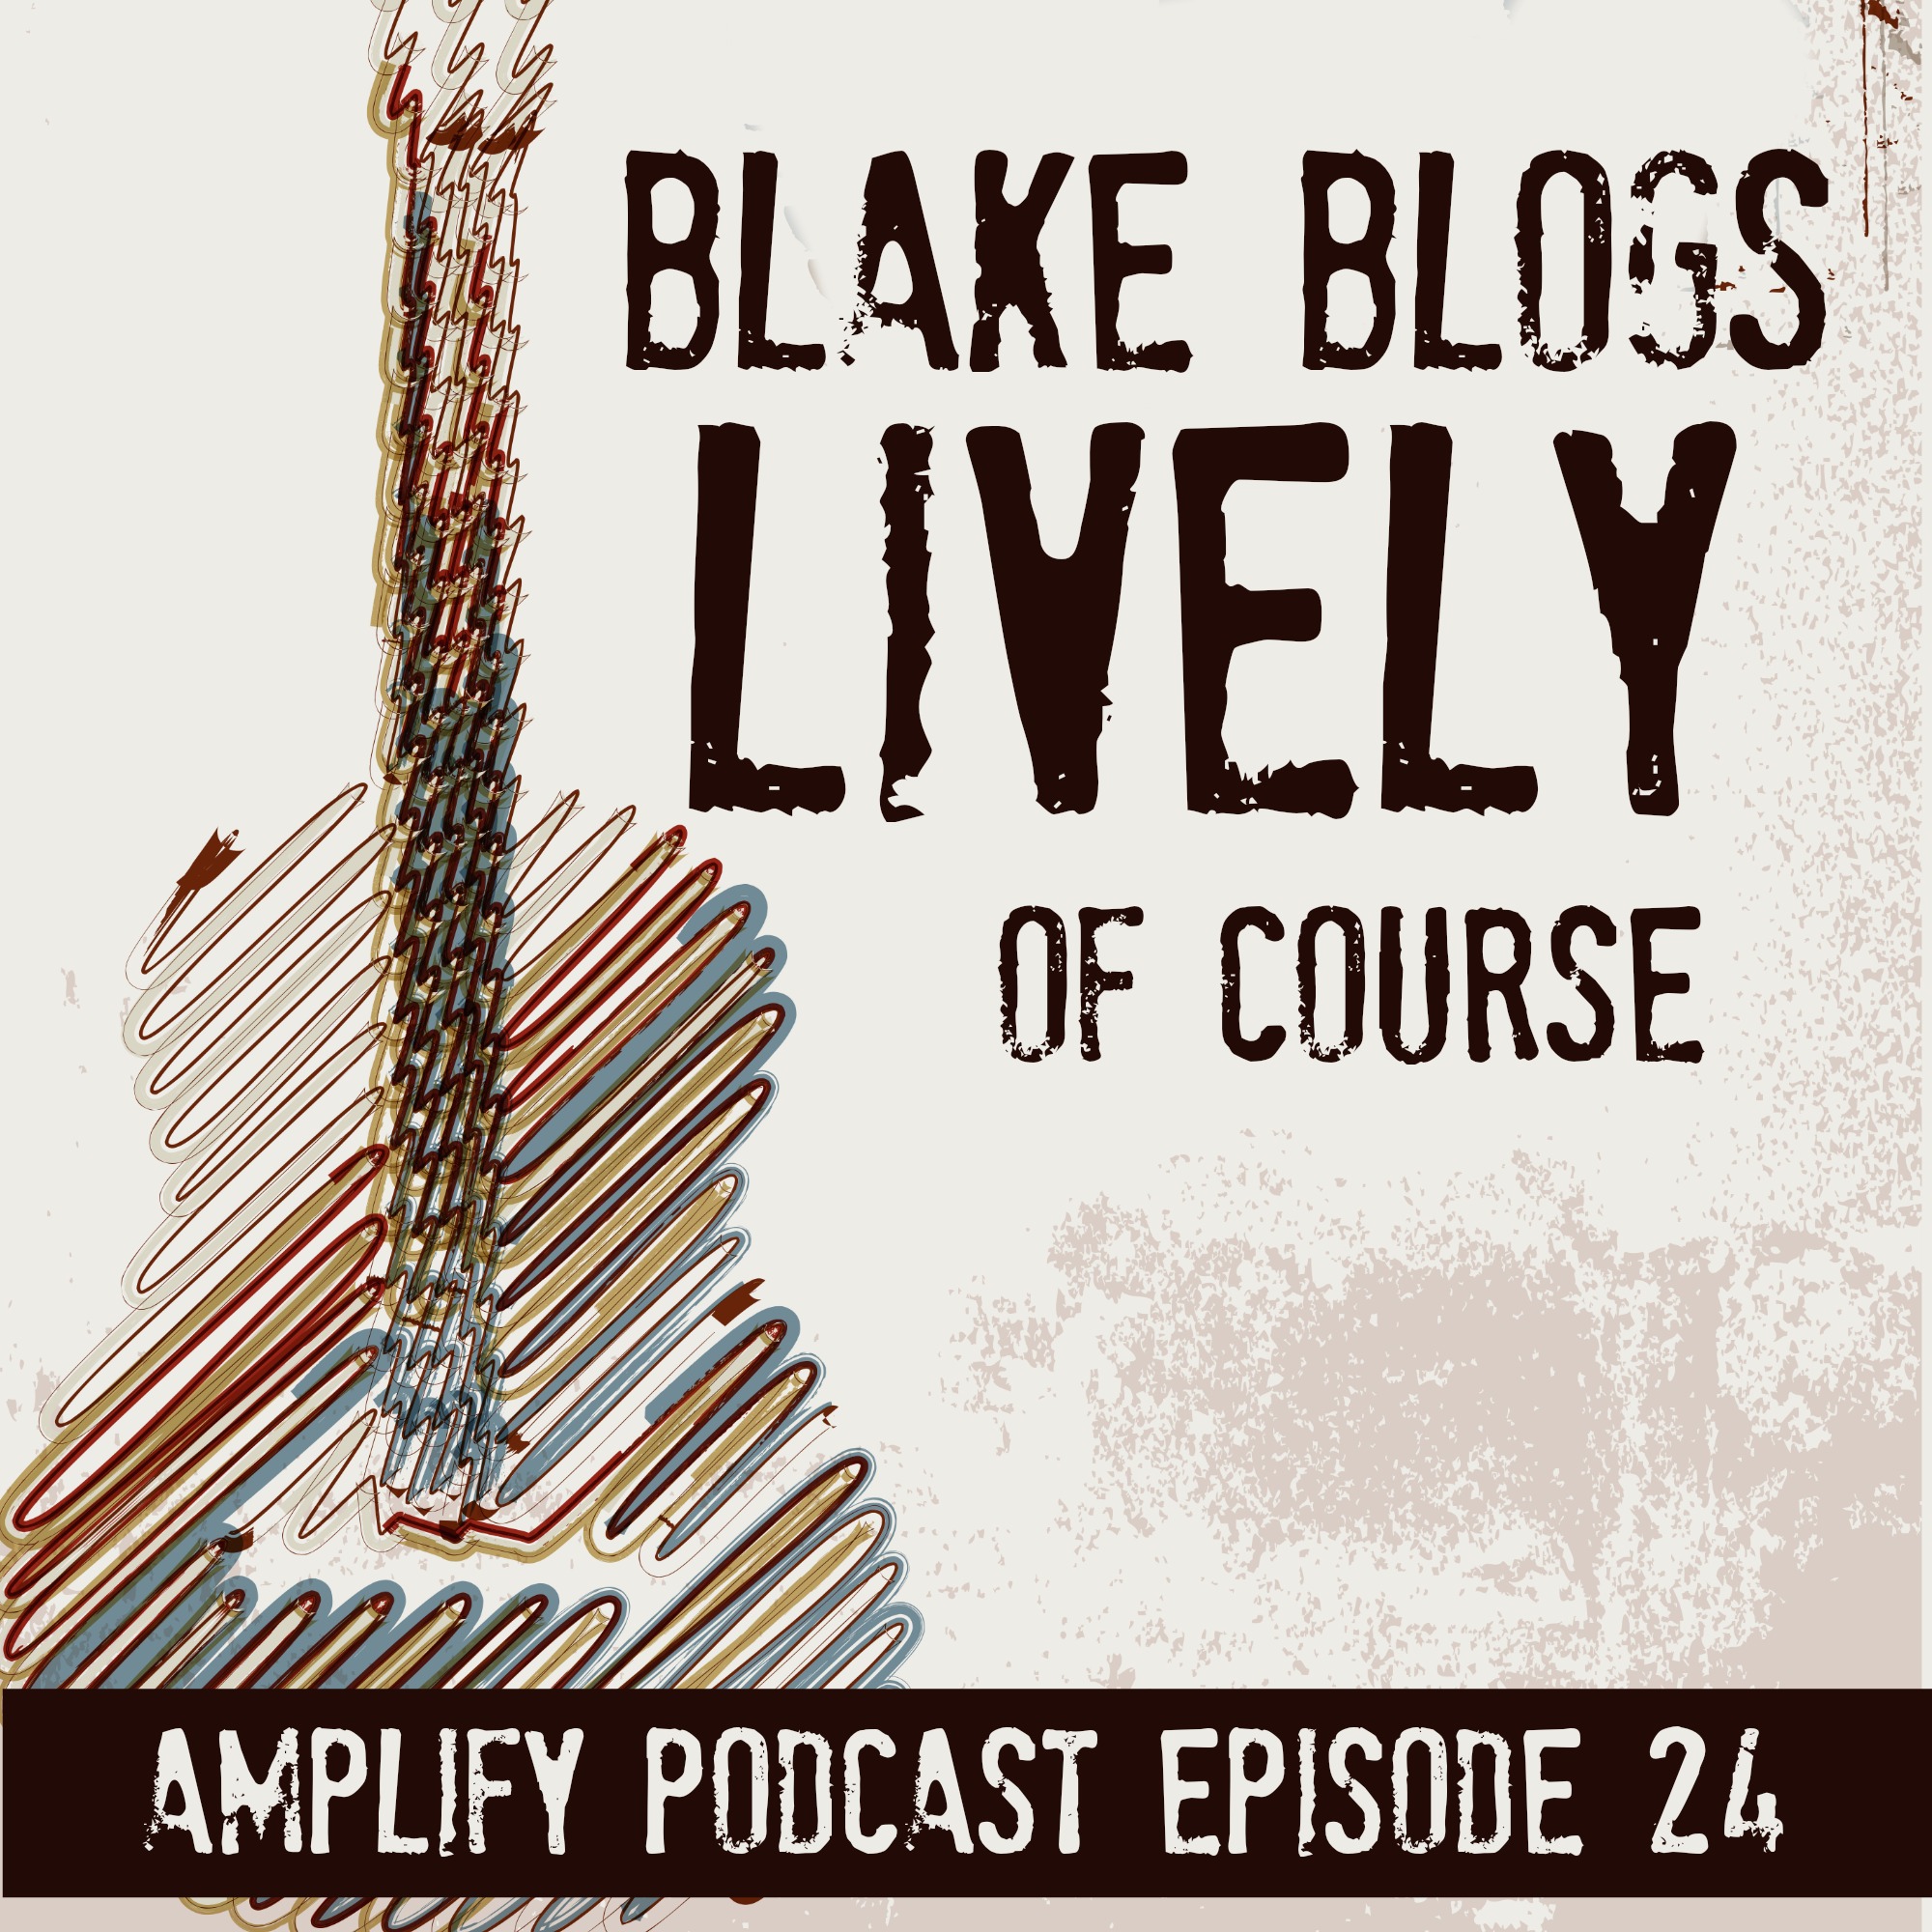 Blake Blogs Lively, of course.